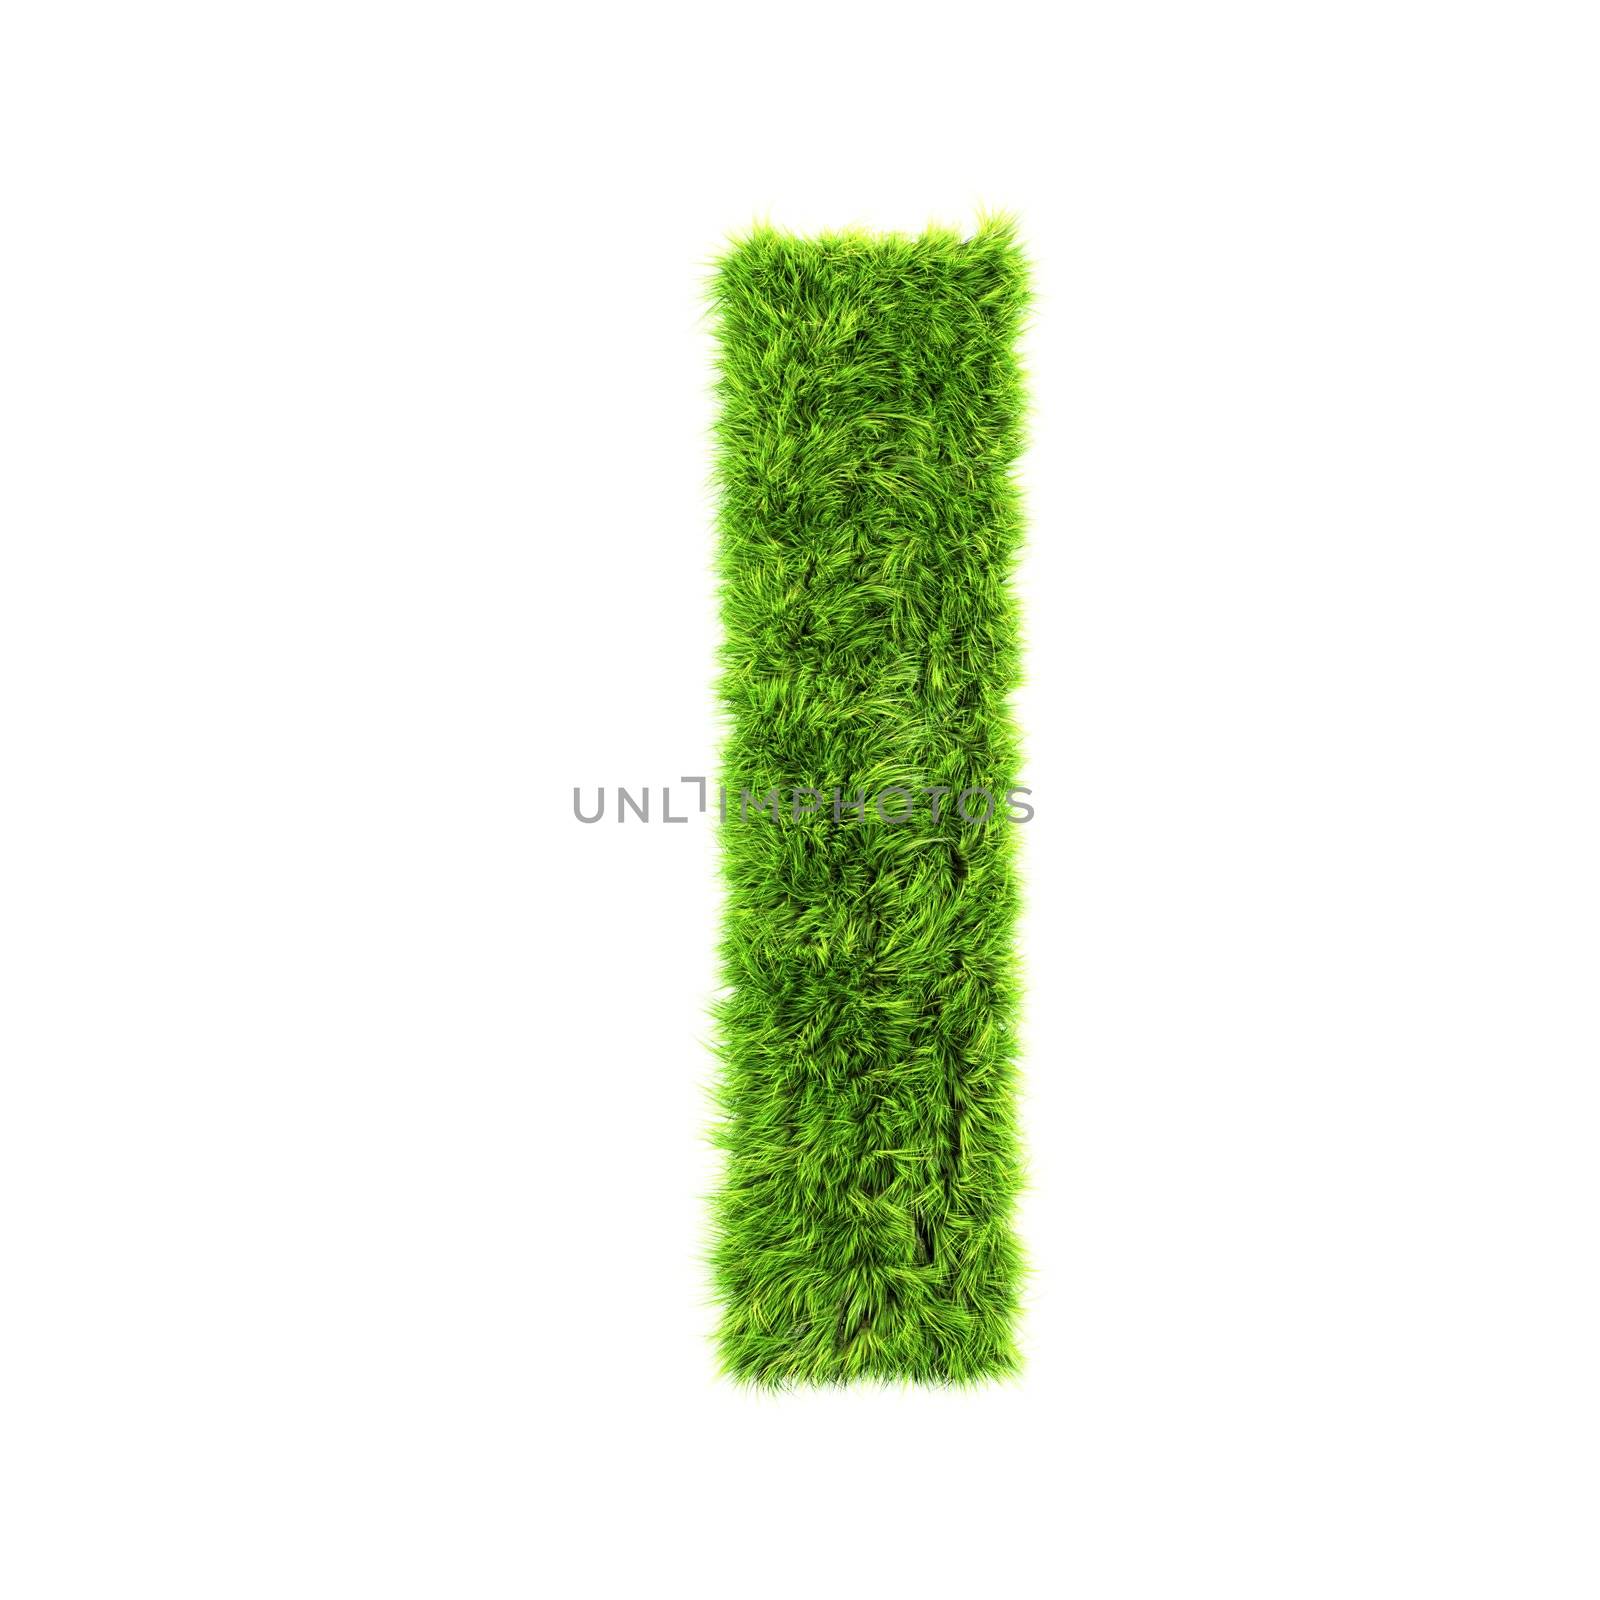 3d grass letter isolated on white background - l by chrisroll